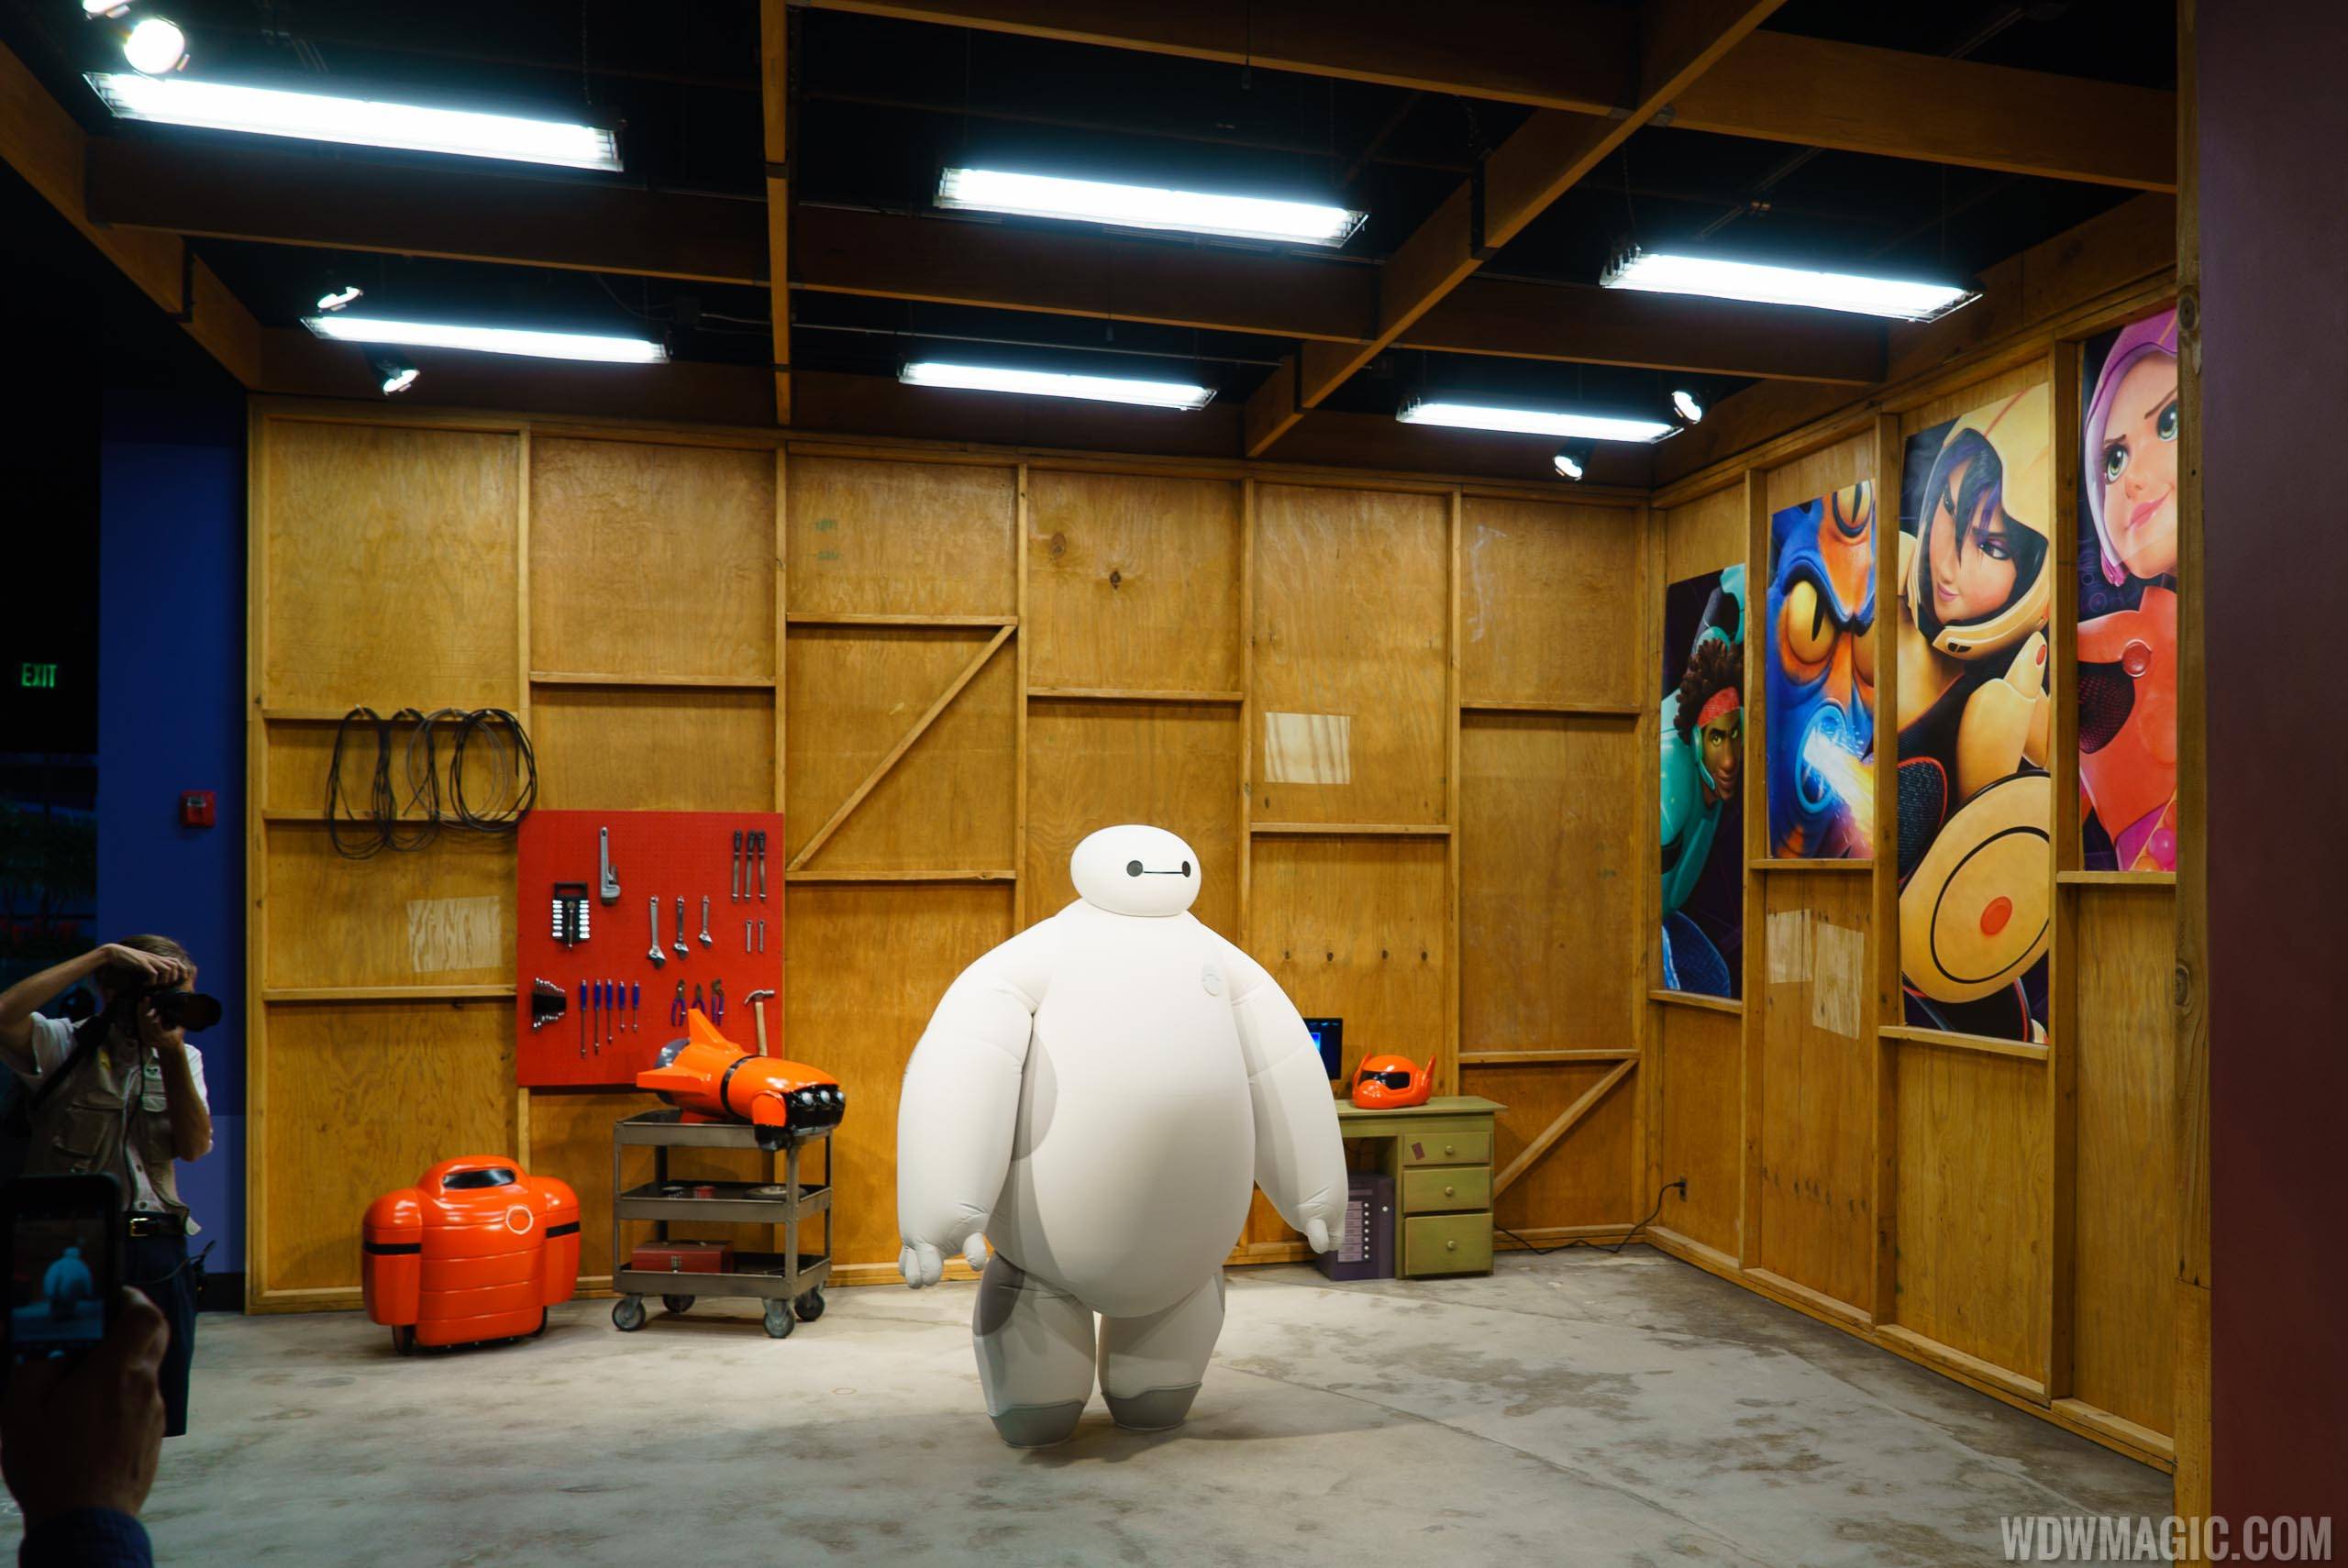 PHOTOS - BAYMAX now appearing at newly expanded Epcot Character Spot